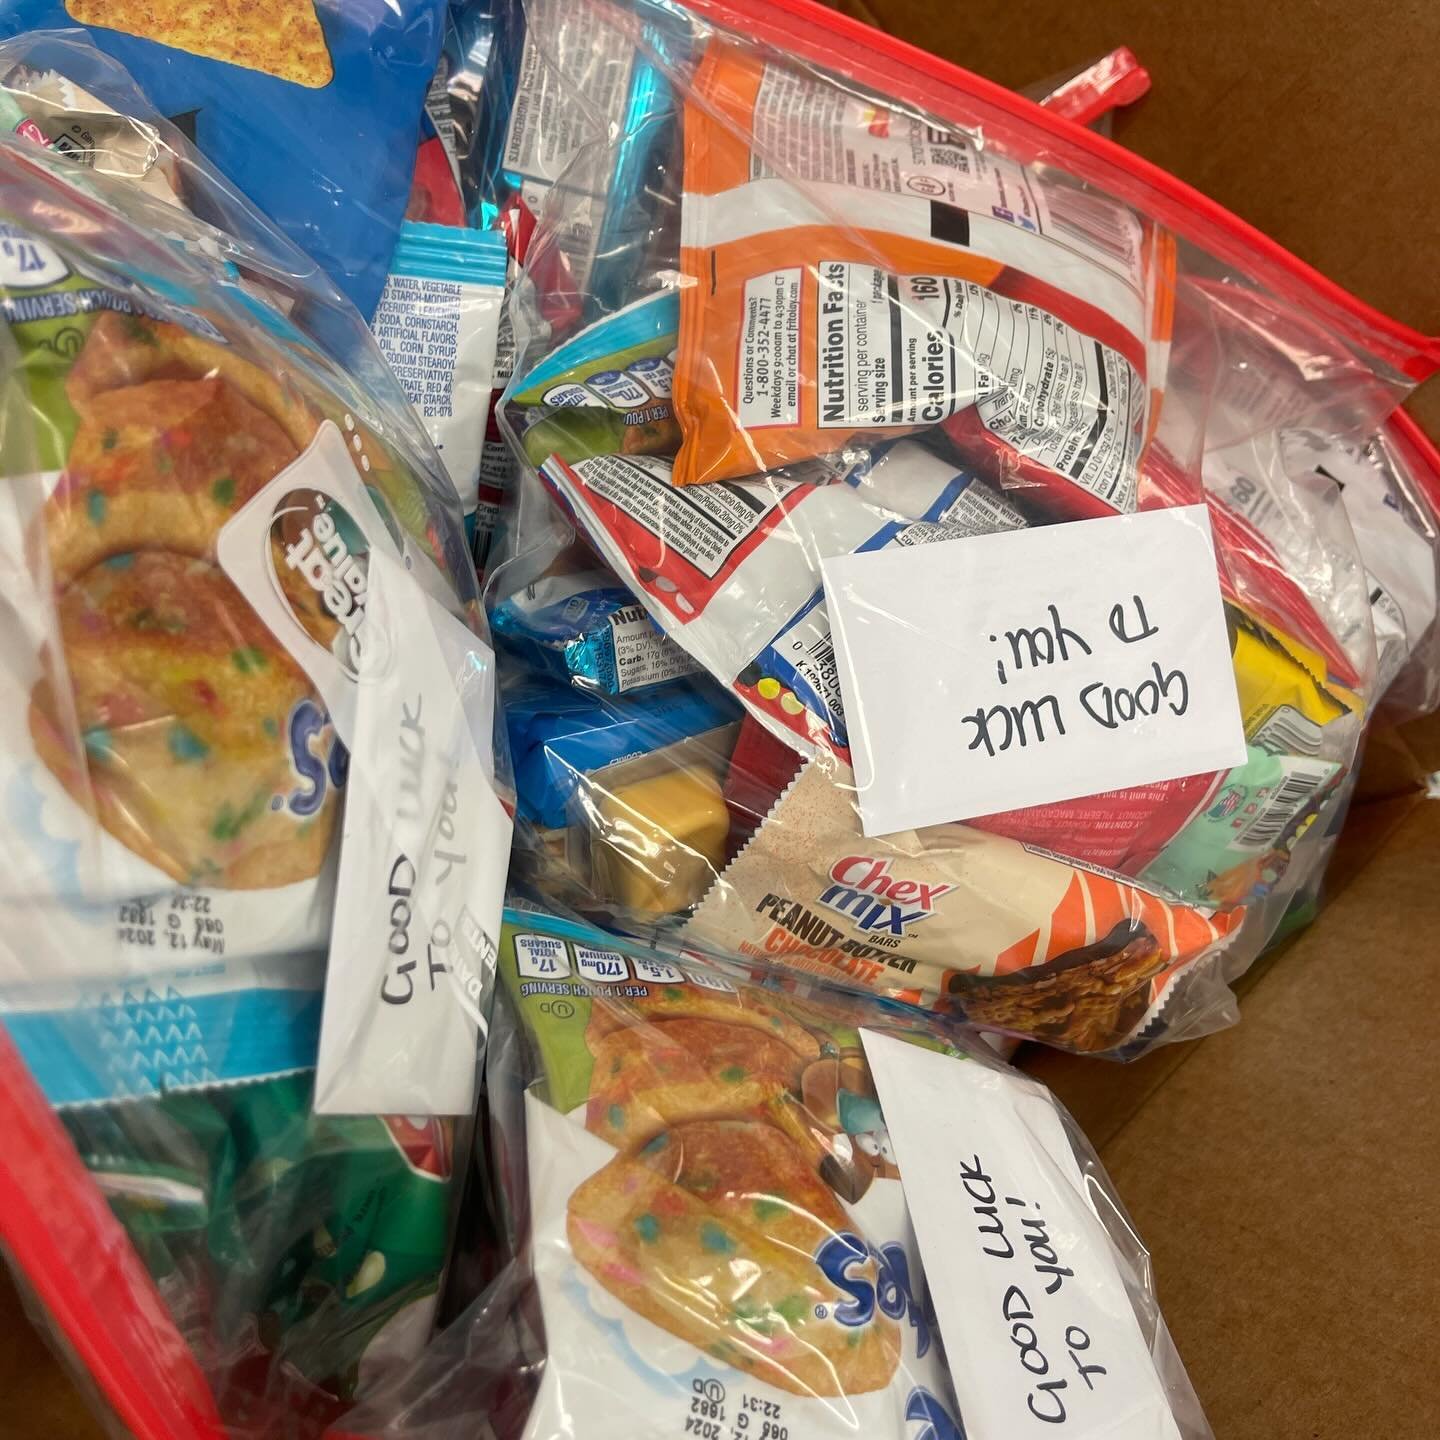 Thank you to @cfrichmondva and the volunteers of the assembling these DIY snack kits ! On behalf of our clients we are very appreciative of your generosity ! 

#CommunityPartners #RVA #Nonprofit